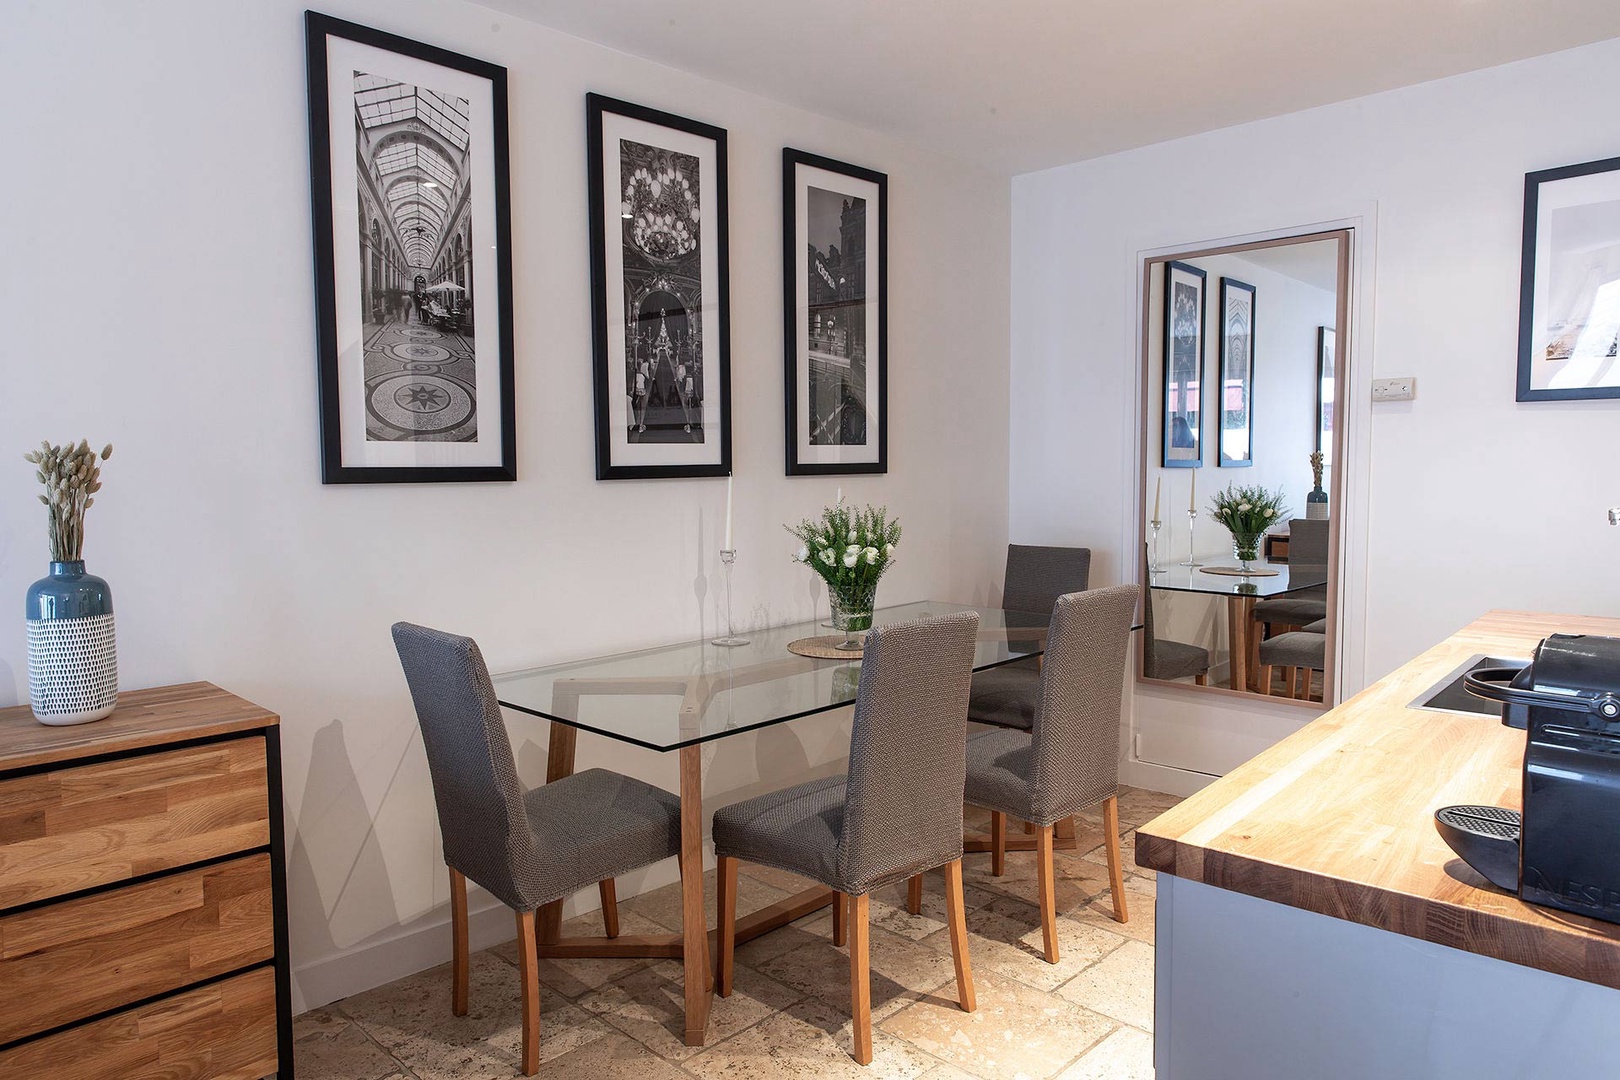 Dining table located in the open plan kitchen.